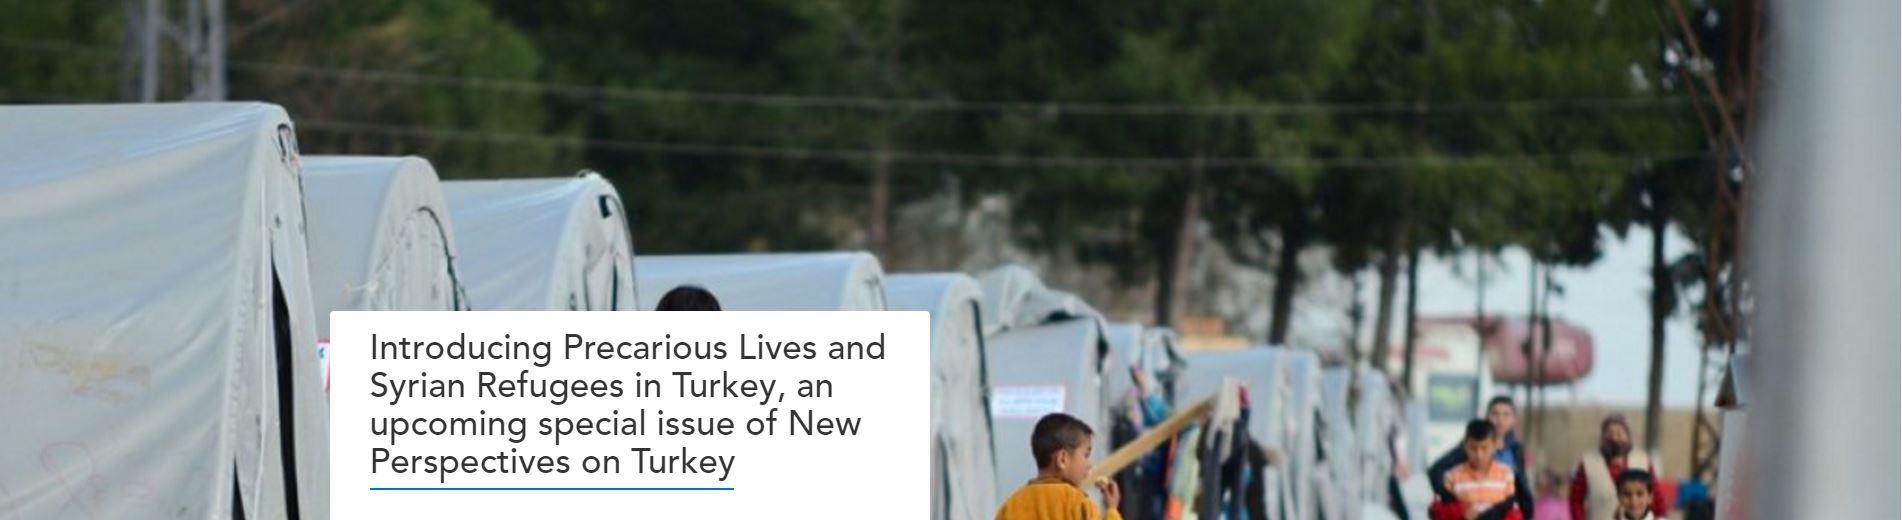 Introducing Precarious Lives and Syrian Refugees in Turkey